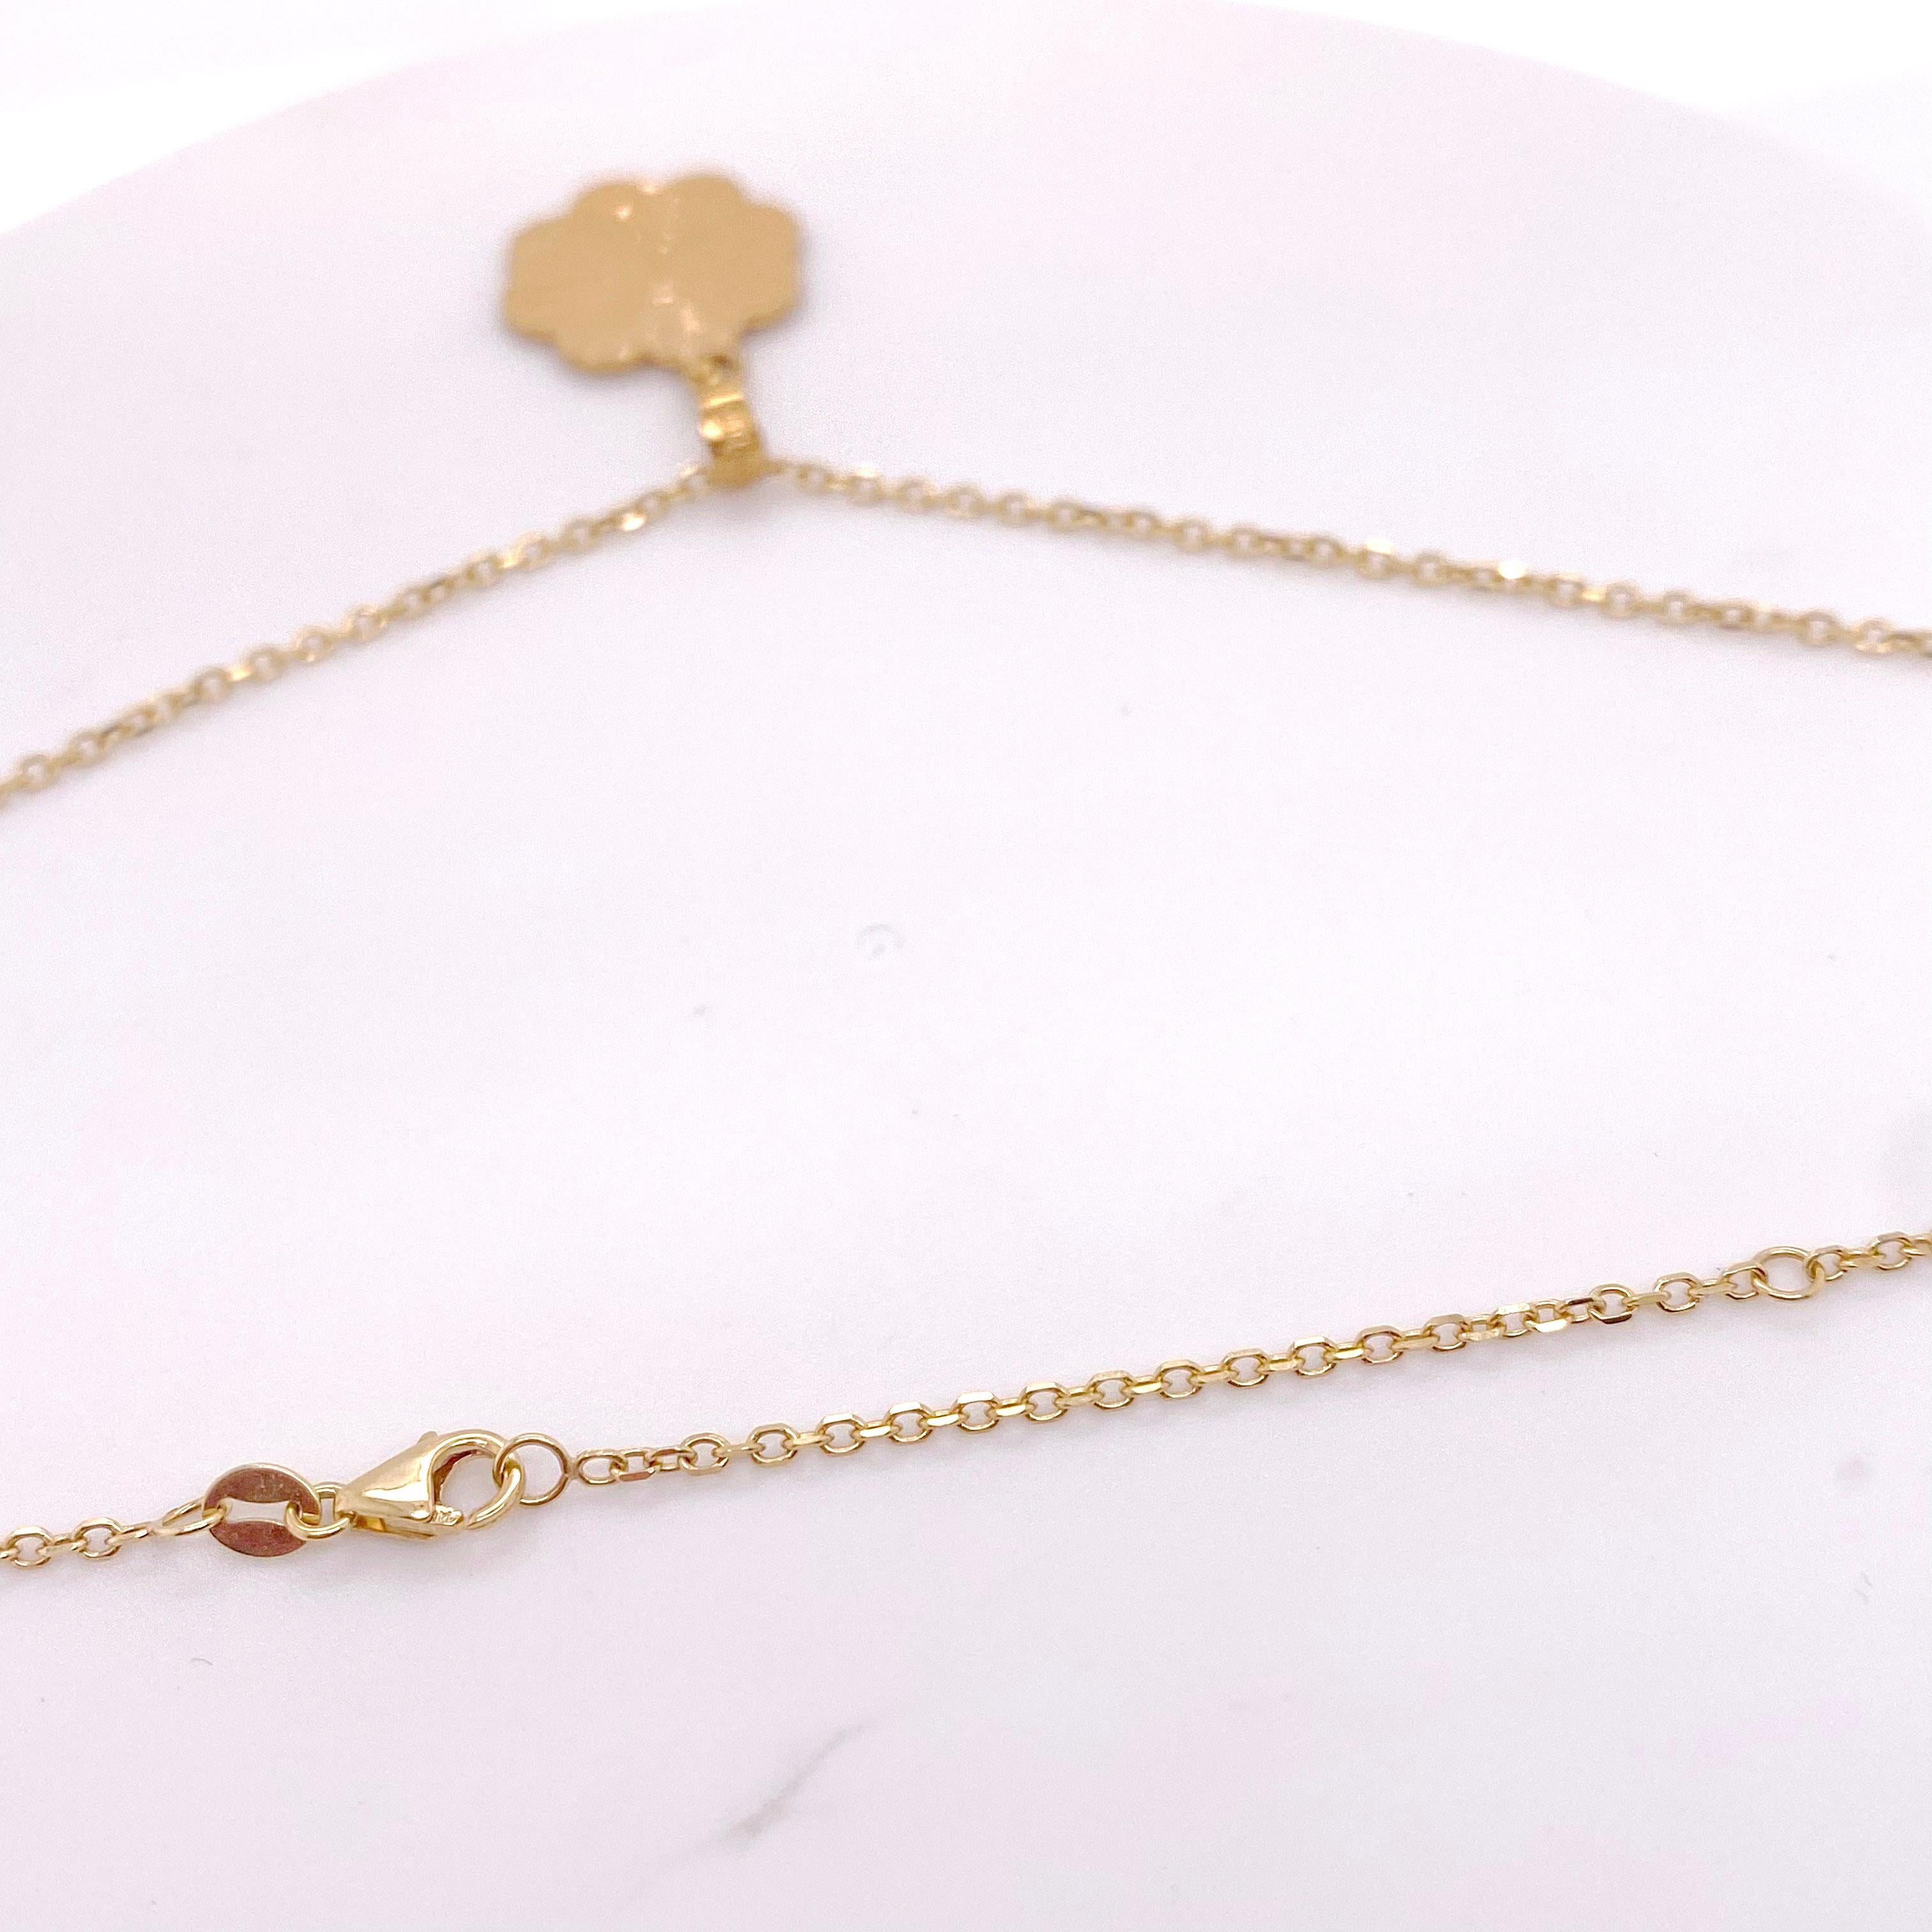 g initial necklace gold